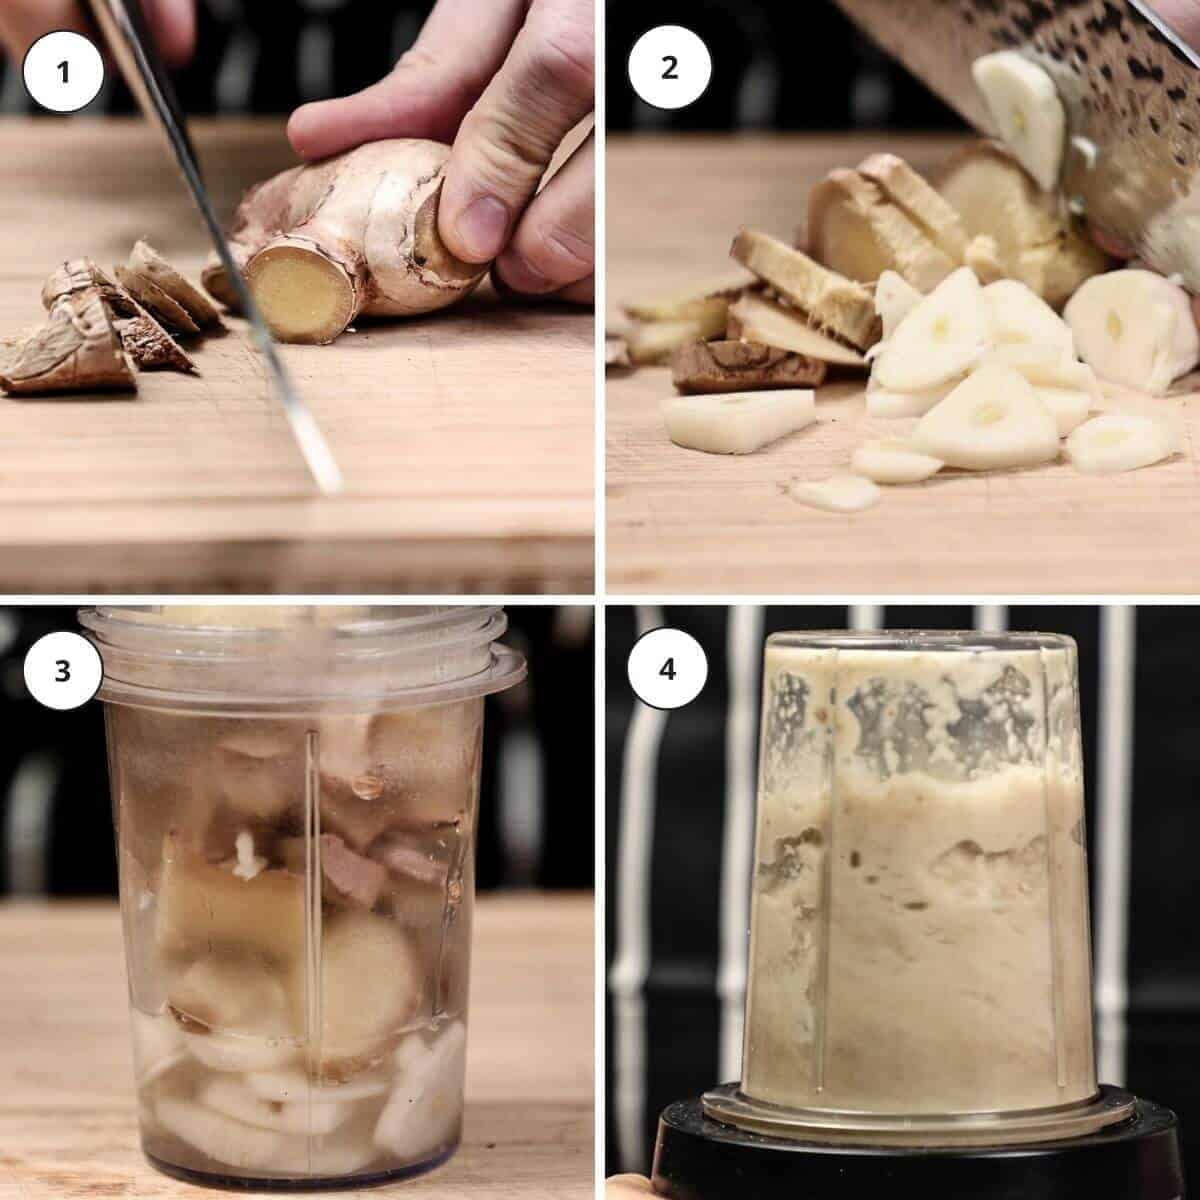 Picture steps for making garlic and ginger paste.